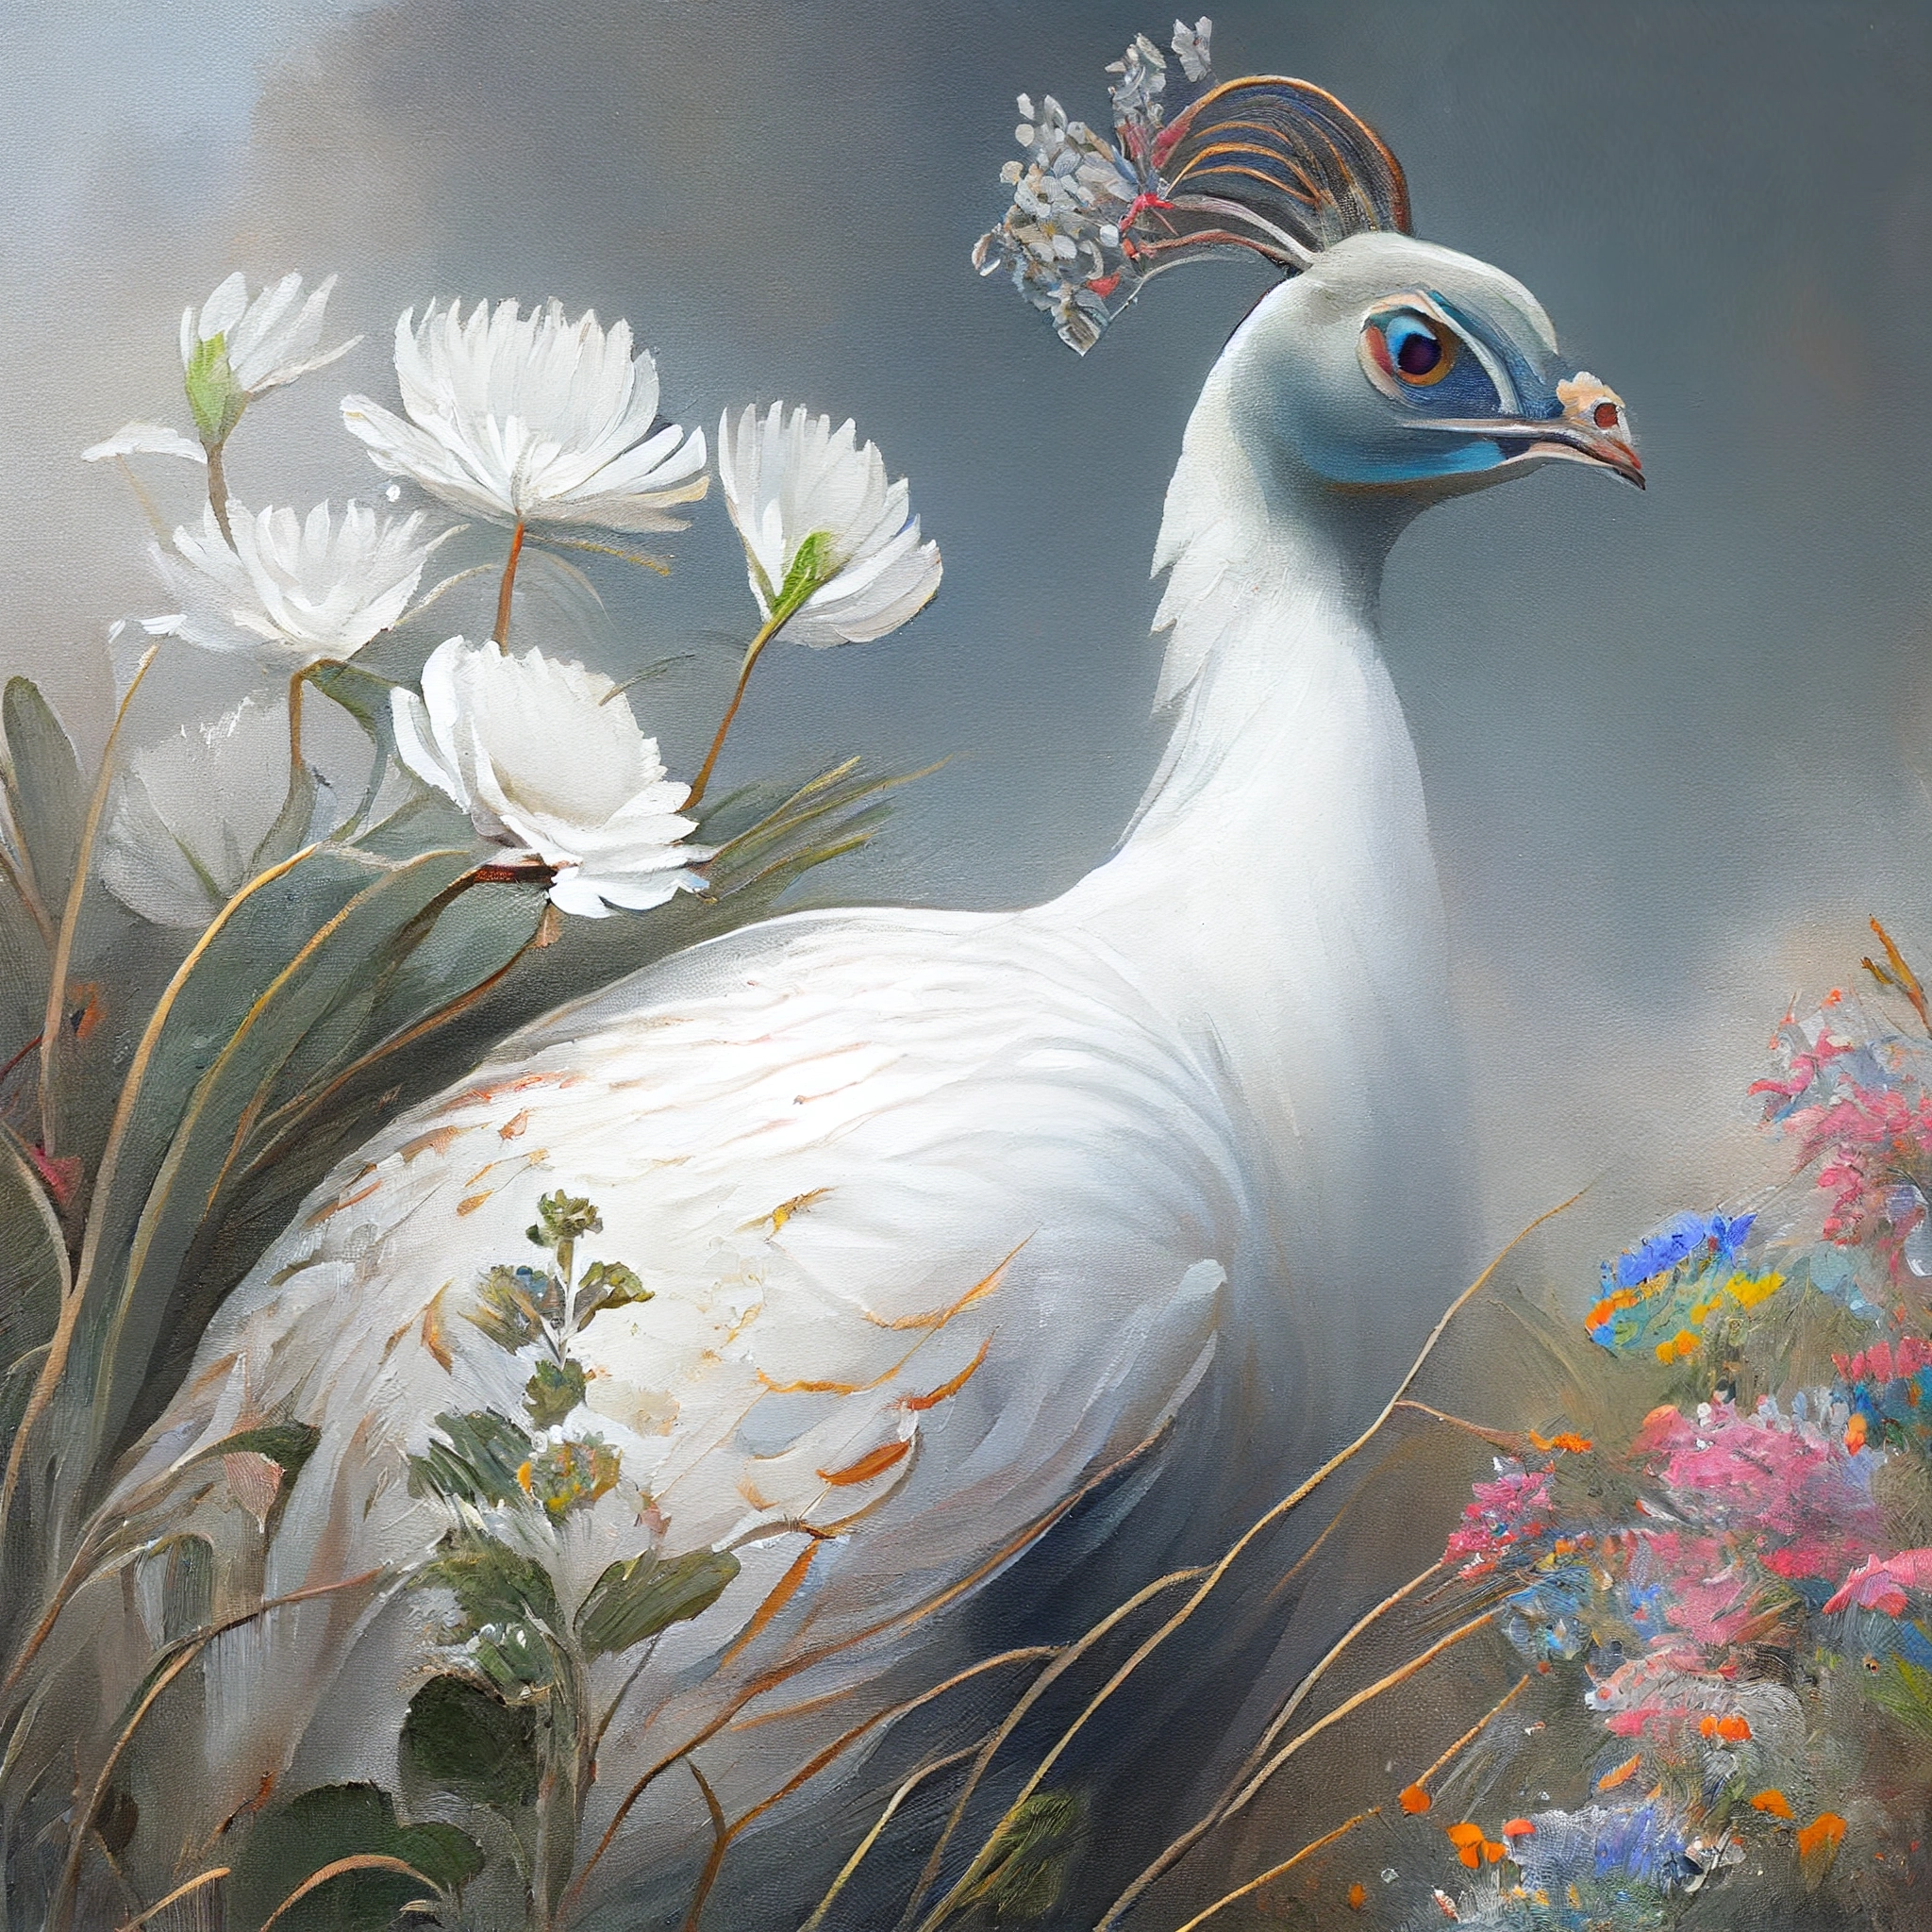 Regal Beauty: White Peacock and Blooming Flowers Art Print